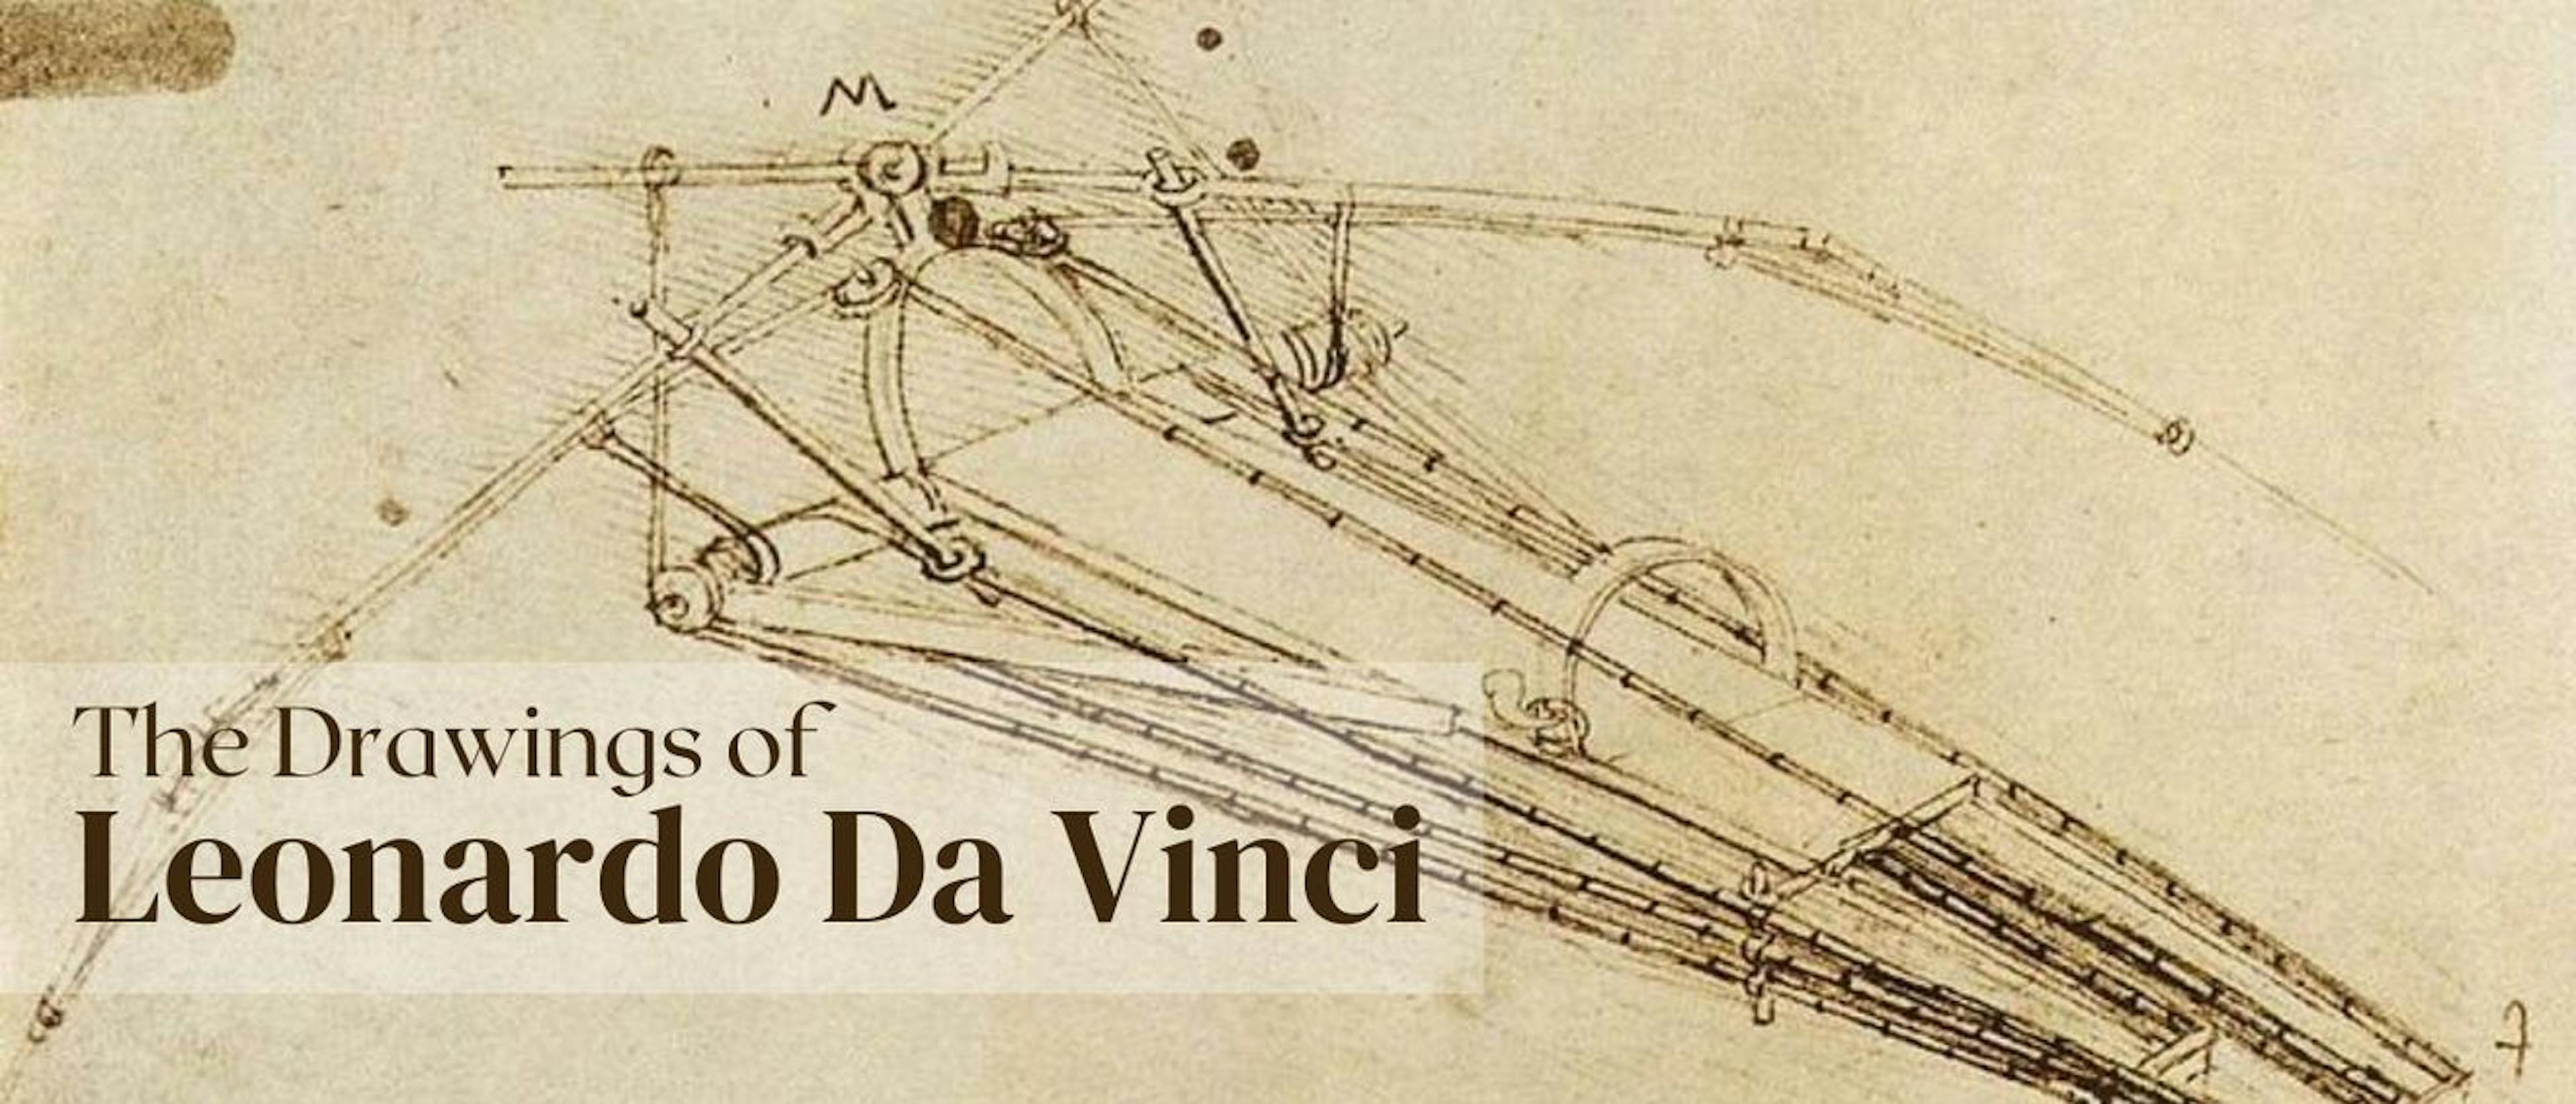 featured image - The Drawings of Leonardo da Vinci by C. Lewis Hind - Table of Links